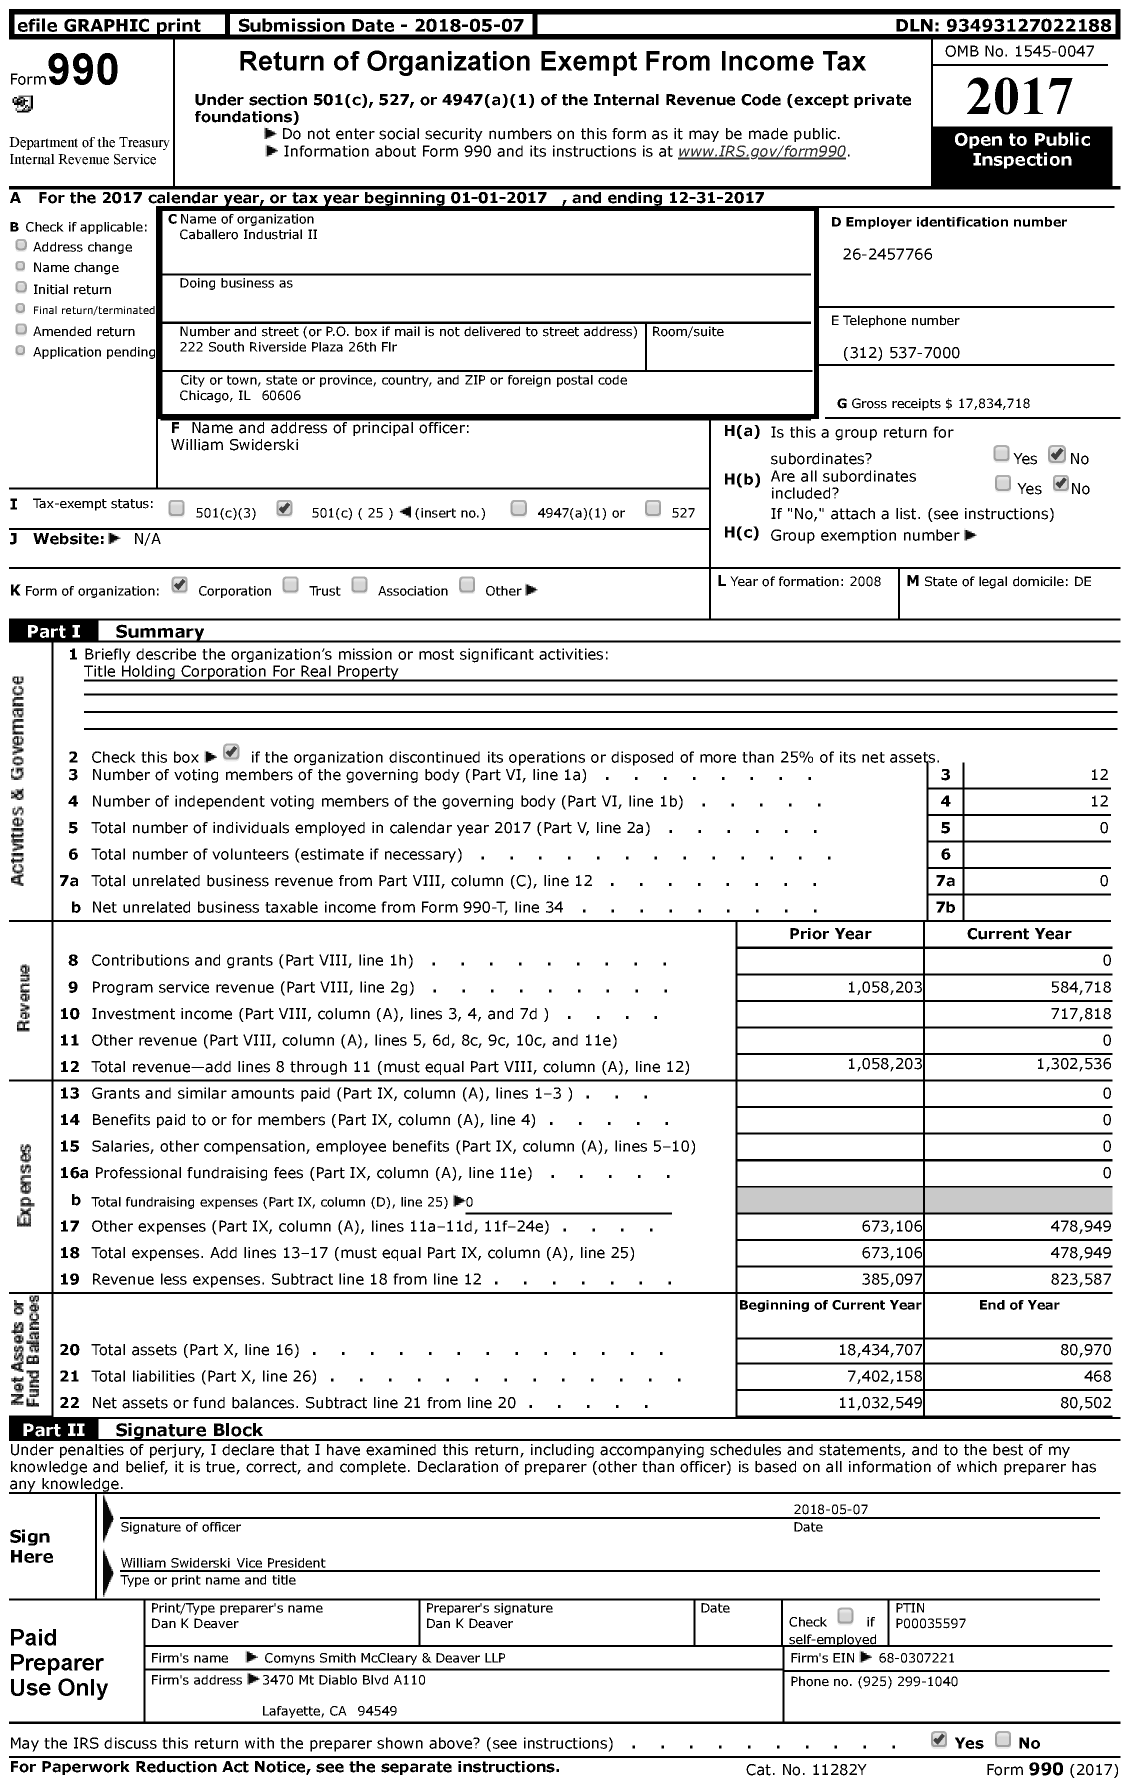 Image of first page of 2017 Form 990 for Caballero Industrial II